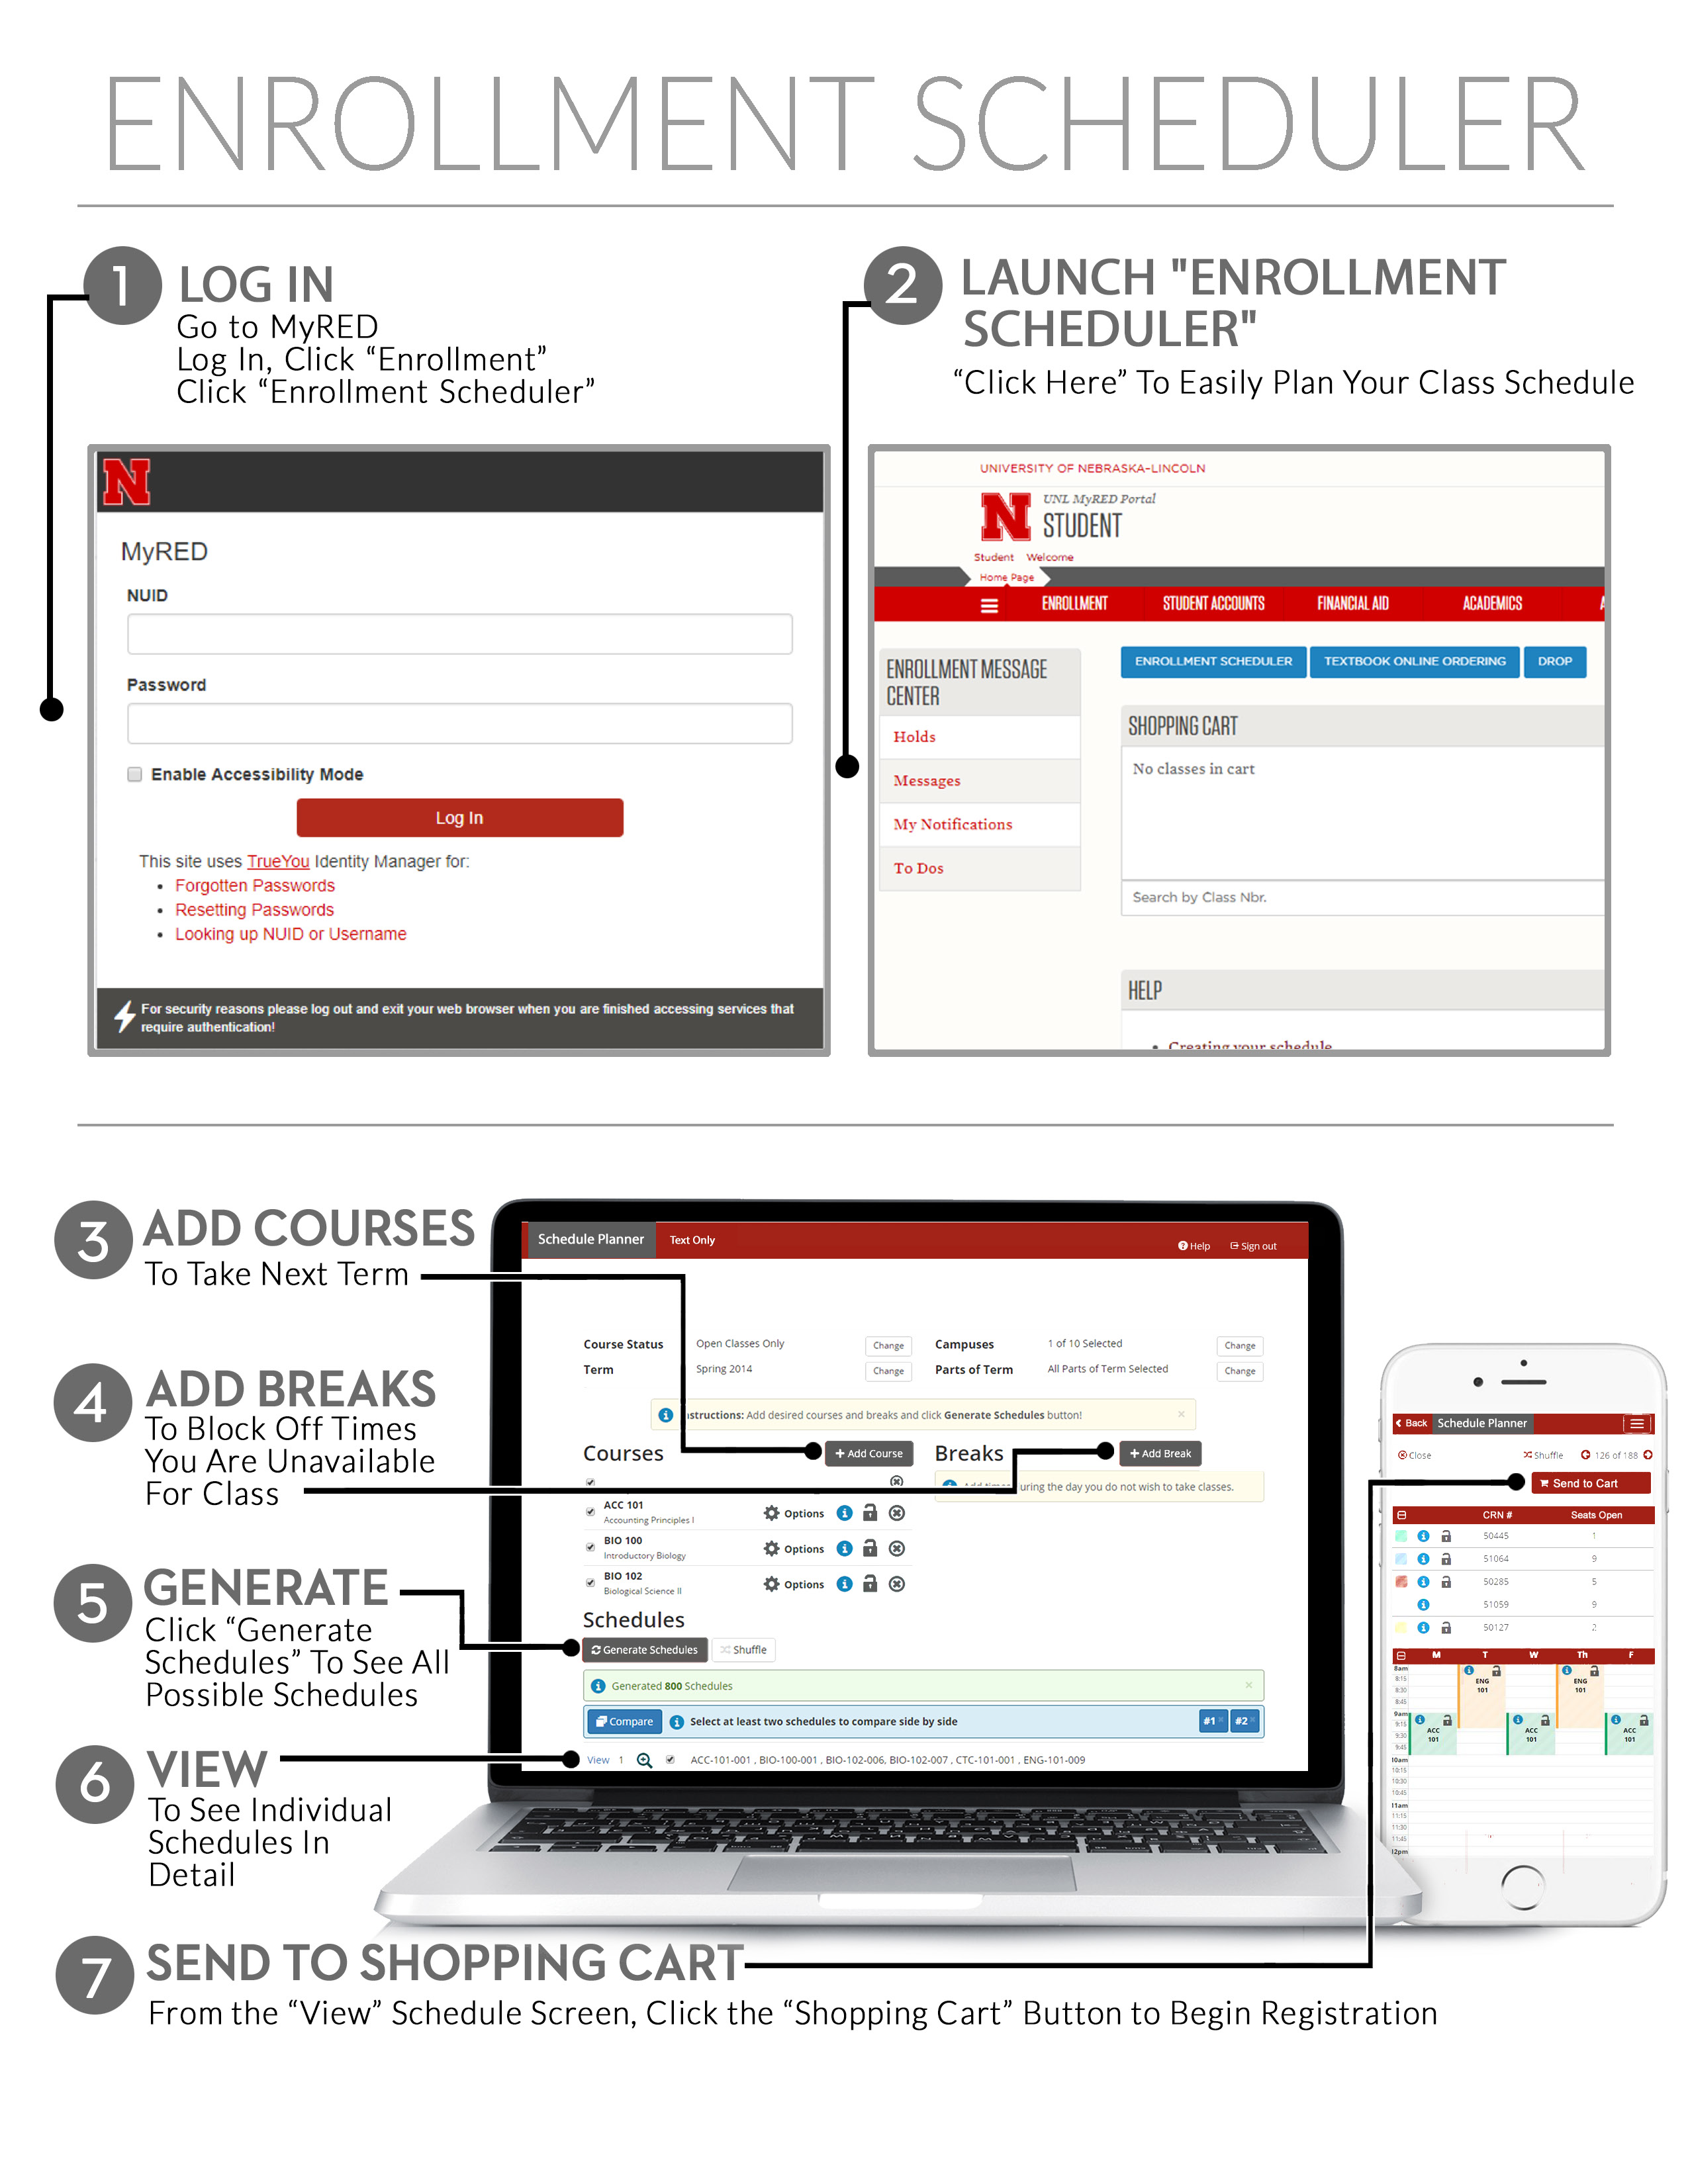 New Enrollment Scheduler Coming to MyRed!! Announce University of